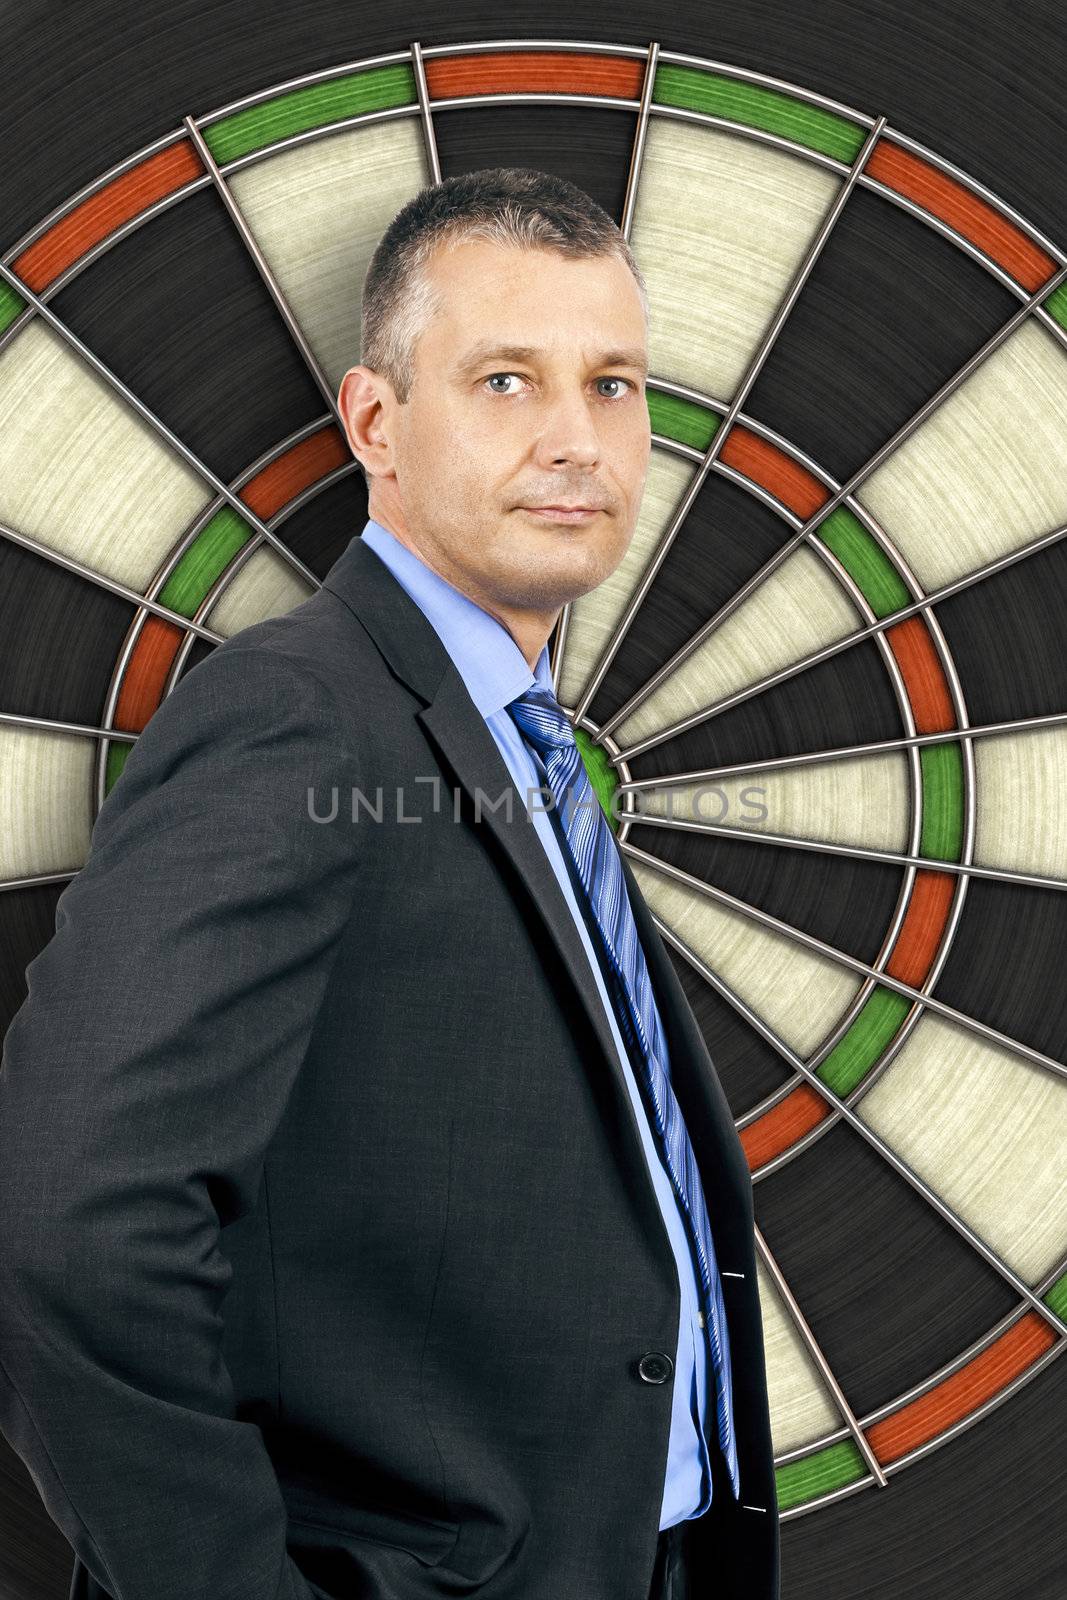 An image of a business man in front of a dartboard